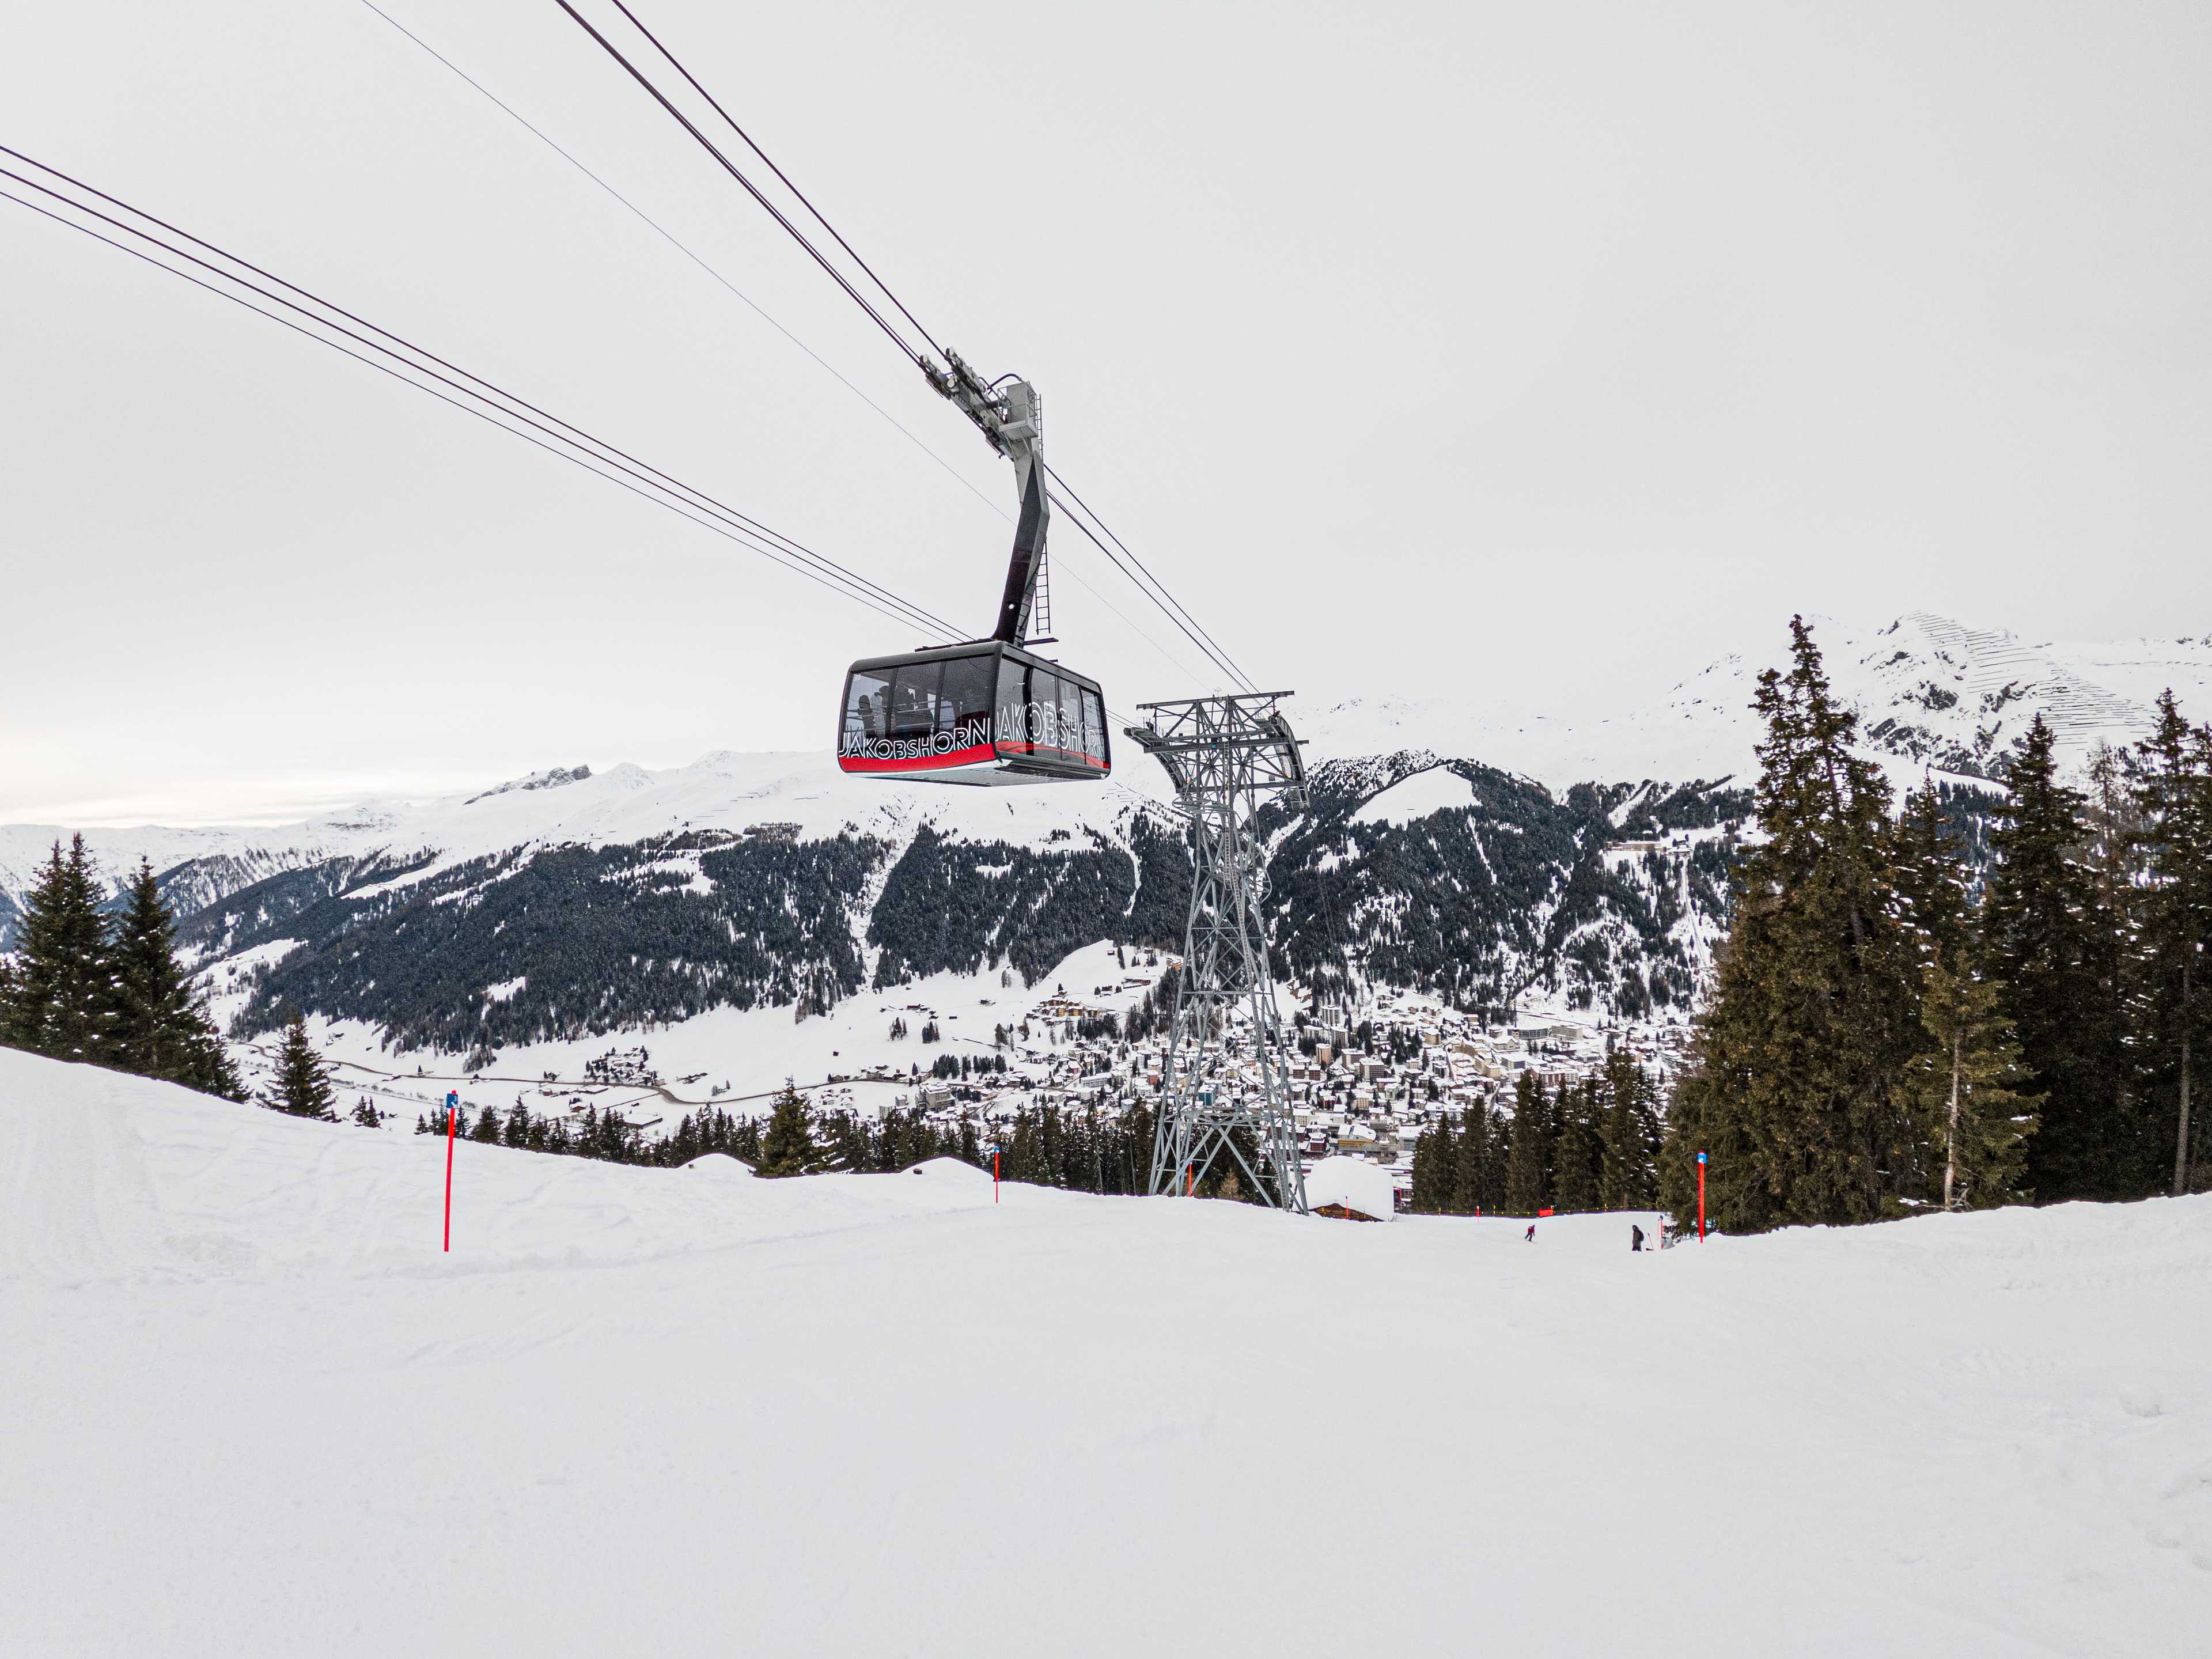 New cabins of Davos-Jschalp cable car